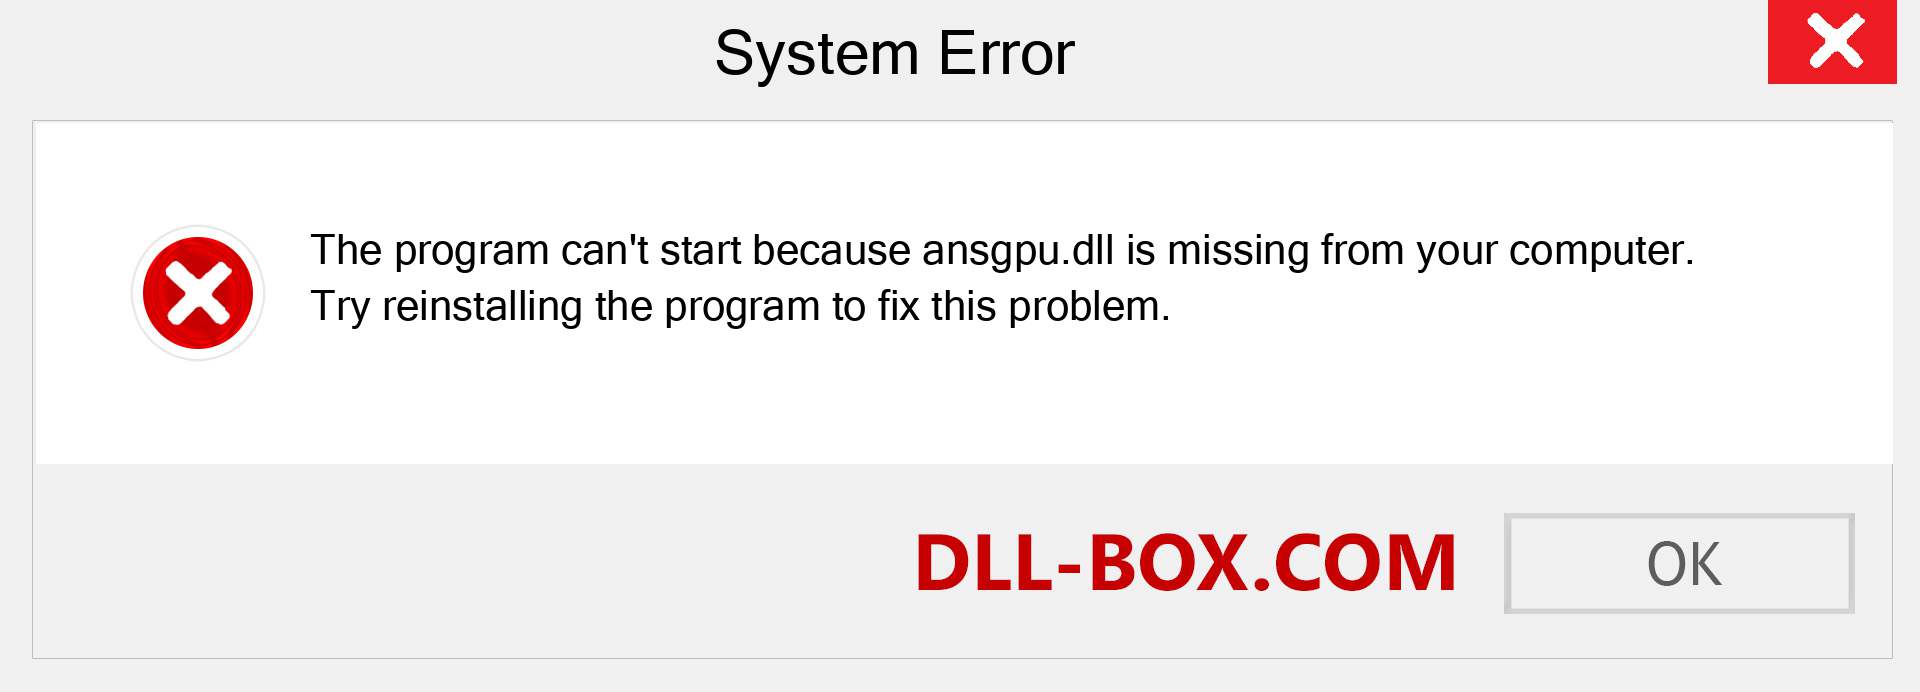  ansgpu.dll file is missing?. Download for Windows 7, 8, 10 - Fix  ansgpu dll Missing Error on Windows, photos, images